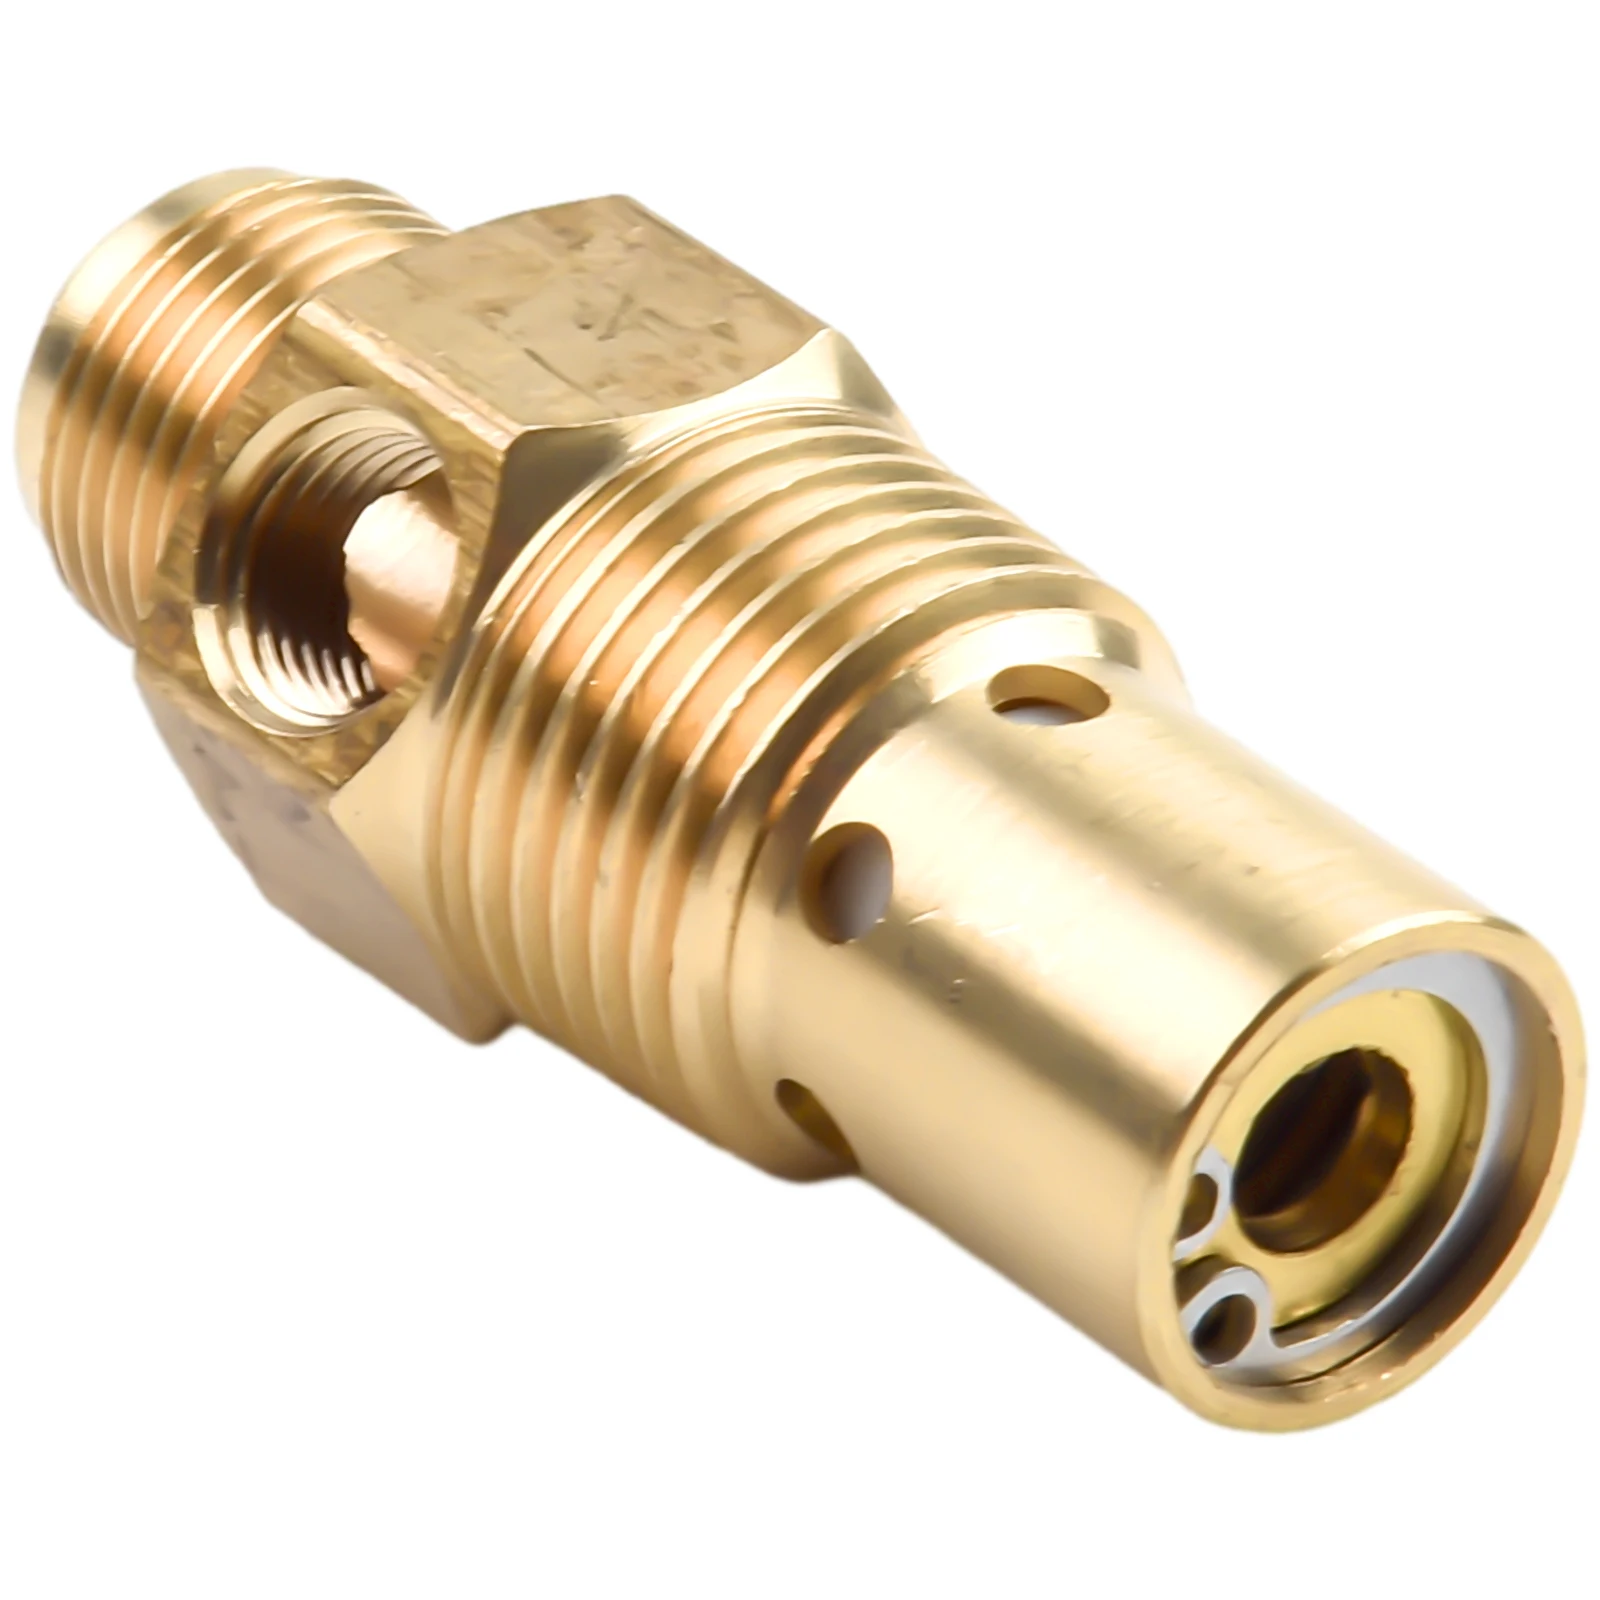 Brass Check Valve G3/8 Air Compressor Male Threaded NPT×1/2In For Air Compressor Replacement Radiator Check Valve 100 pack of male elbow check valve 1 8 thread male x 1 4 quick push fitting connection water filter and reverse osmosis system